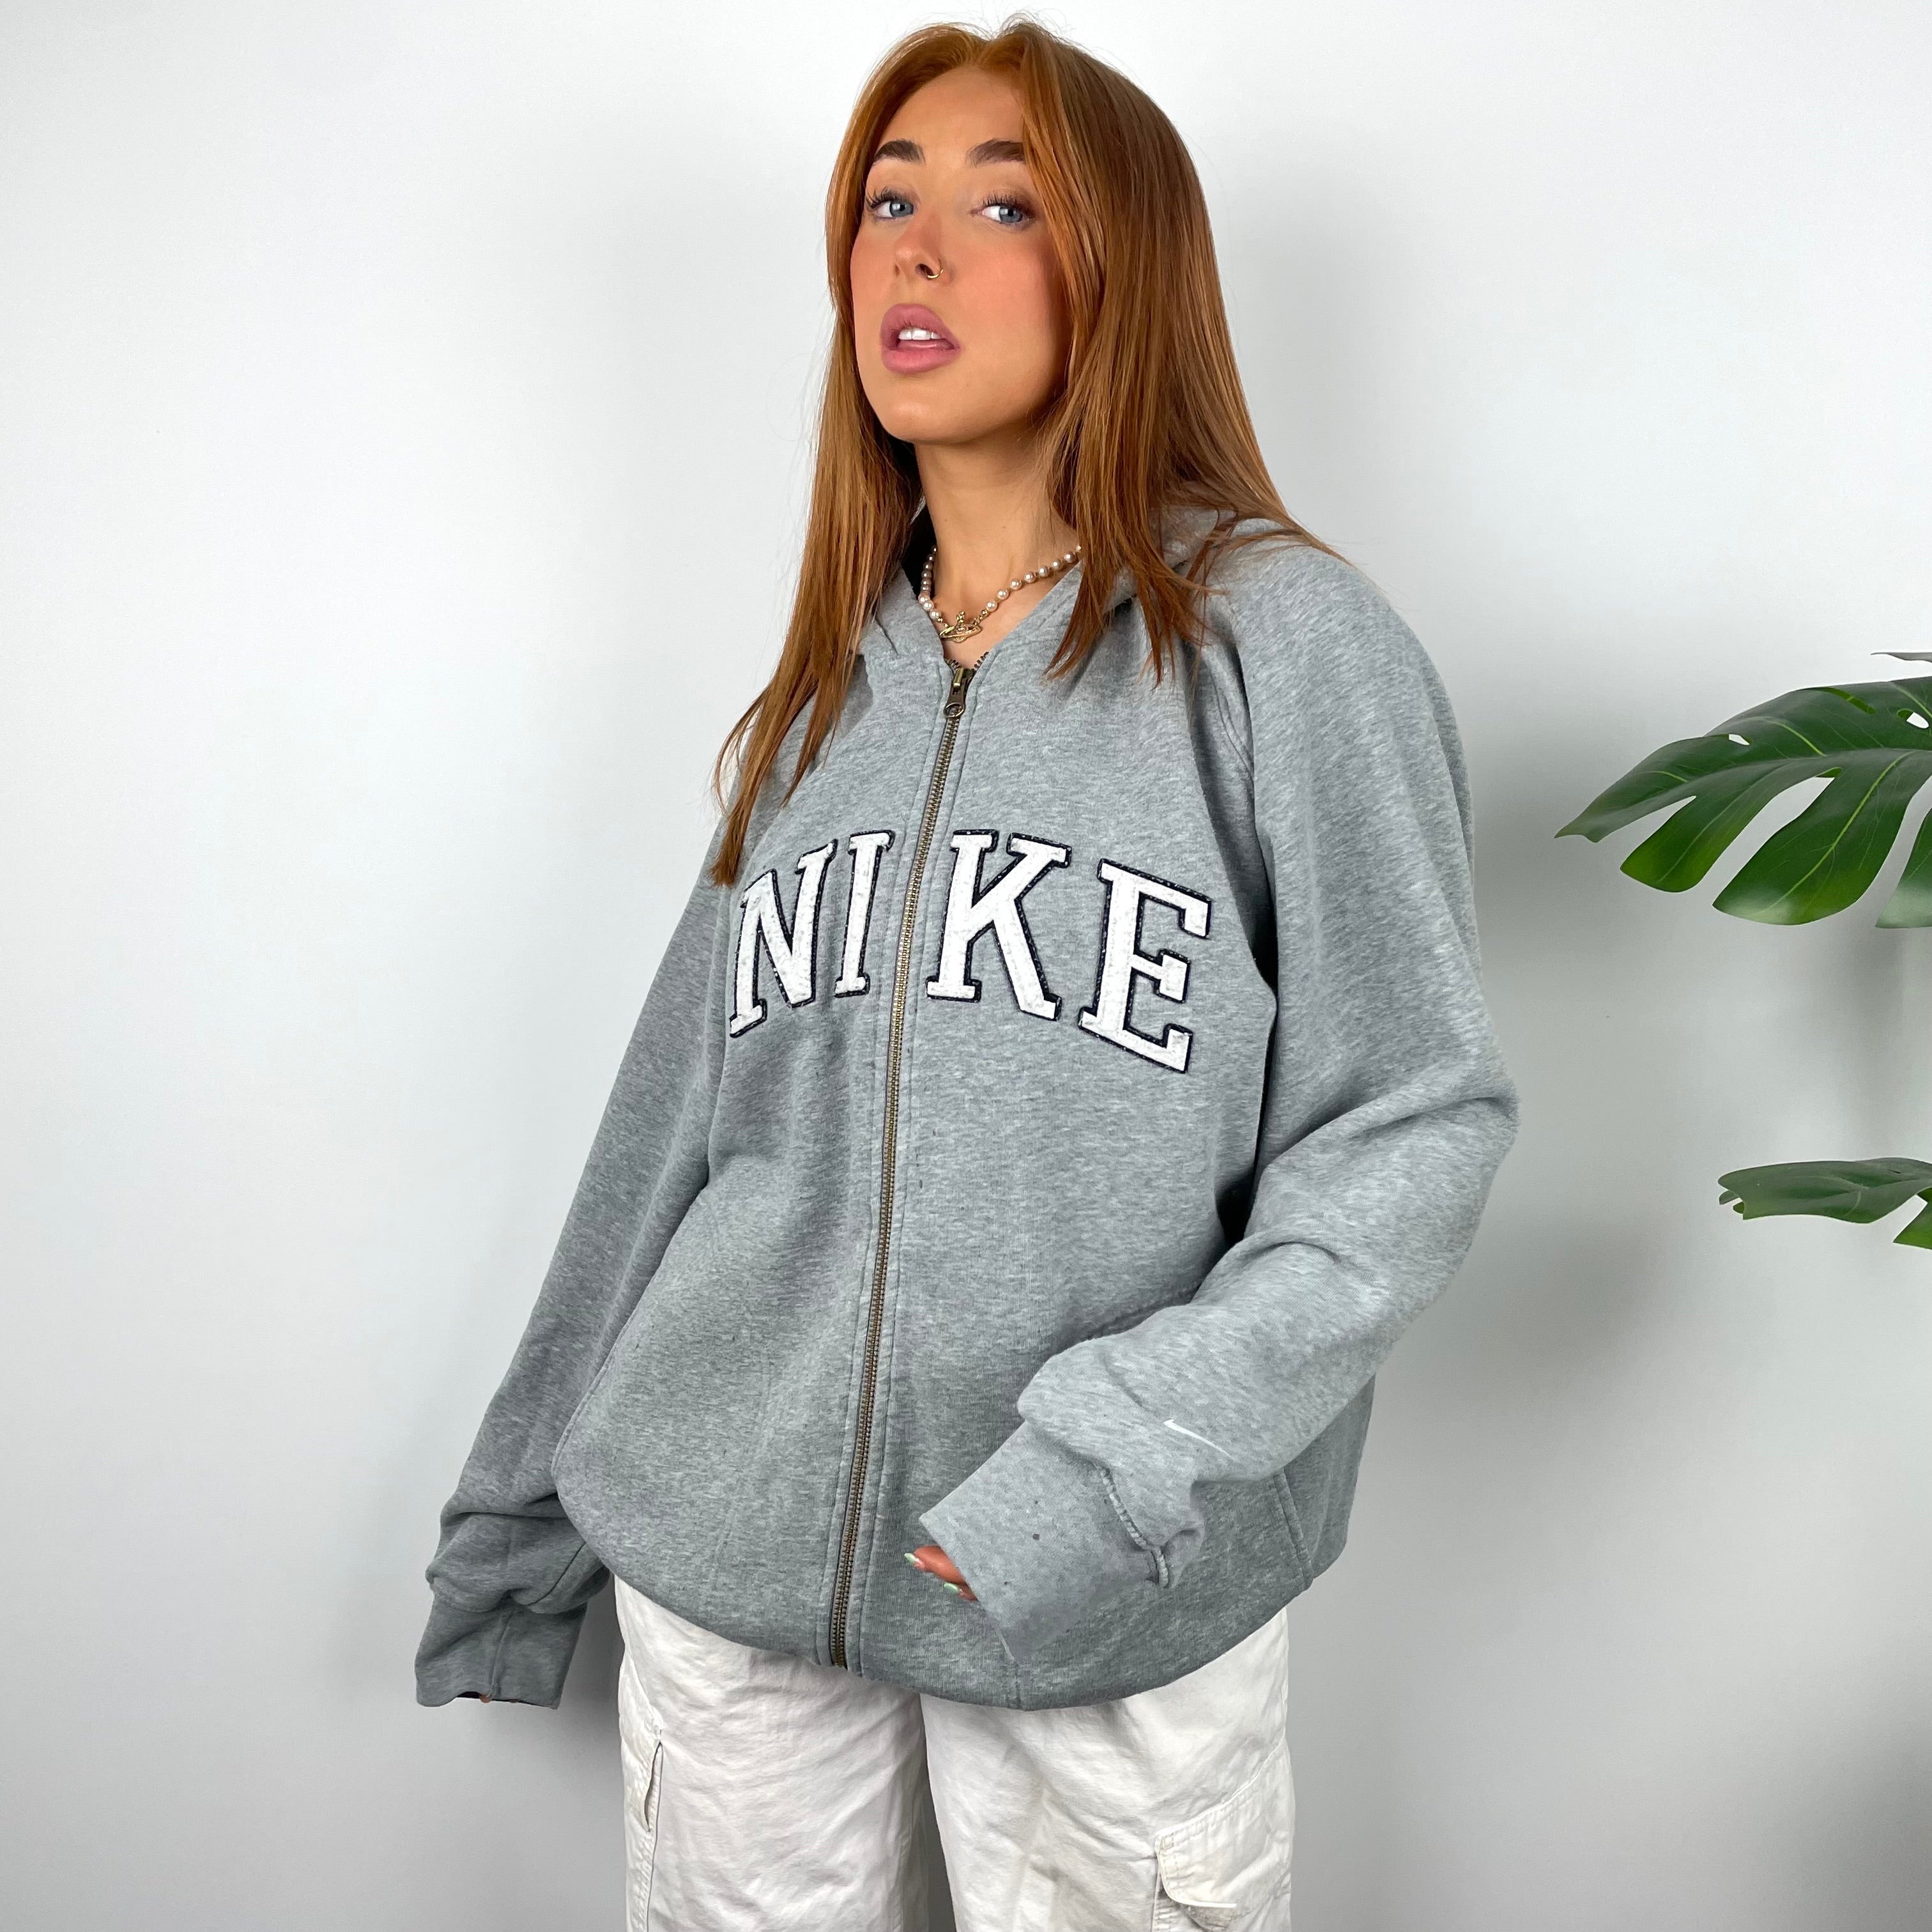 Nike Grey Embroidered Spell Out Zip Up Hoodie Jacket as worn by Annalivia Hynds (L)